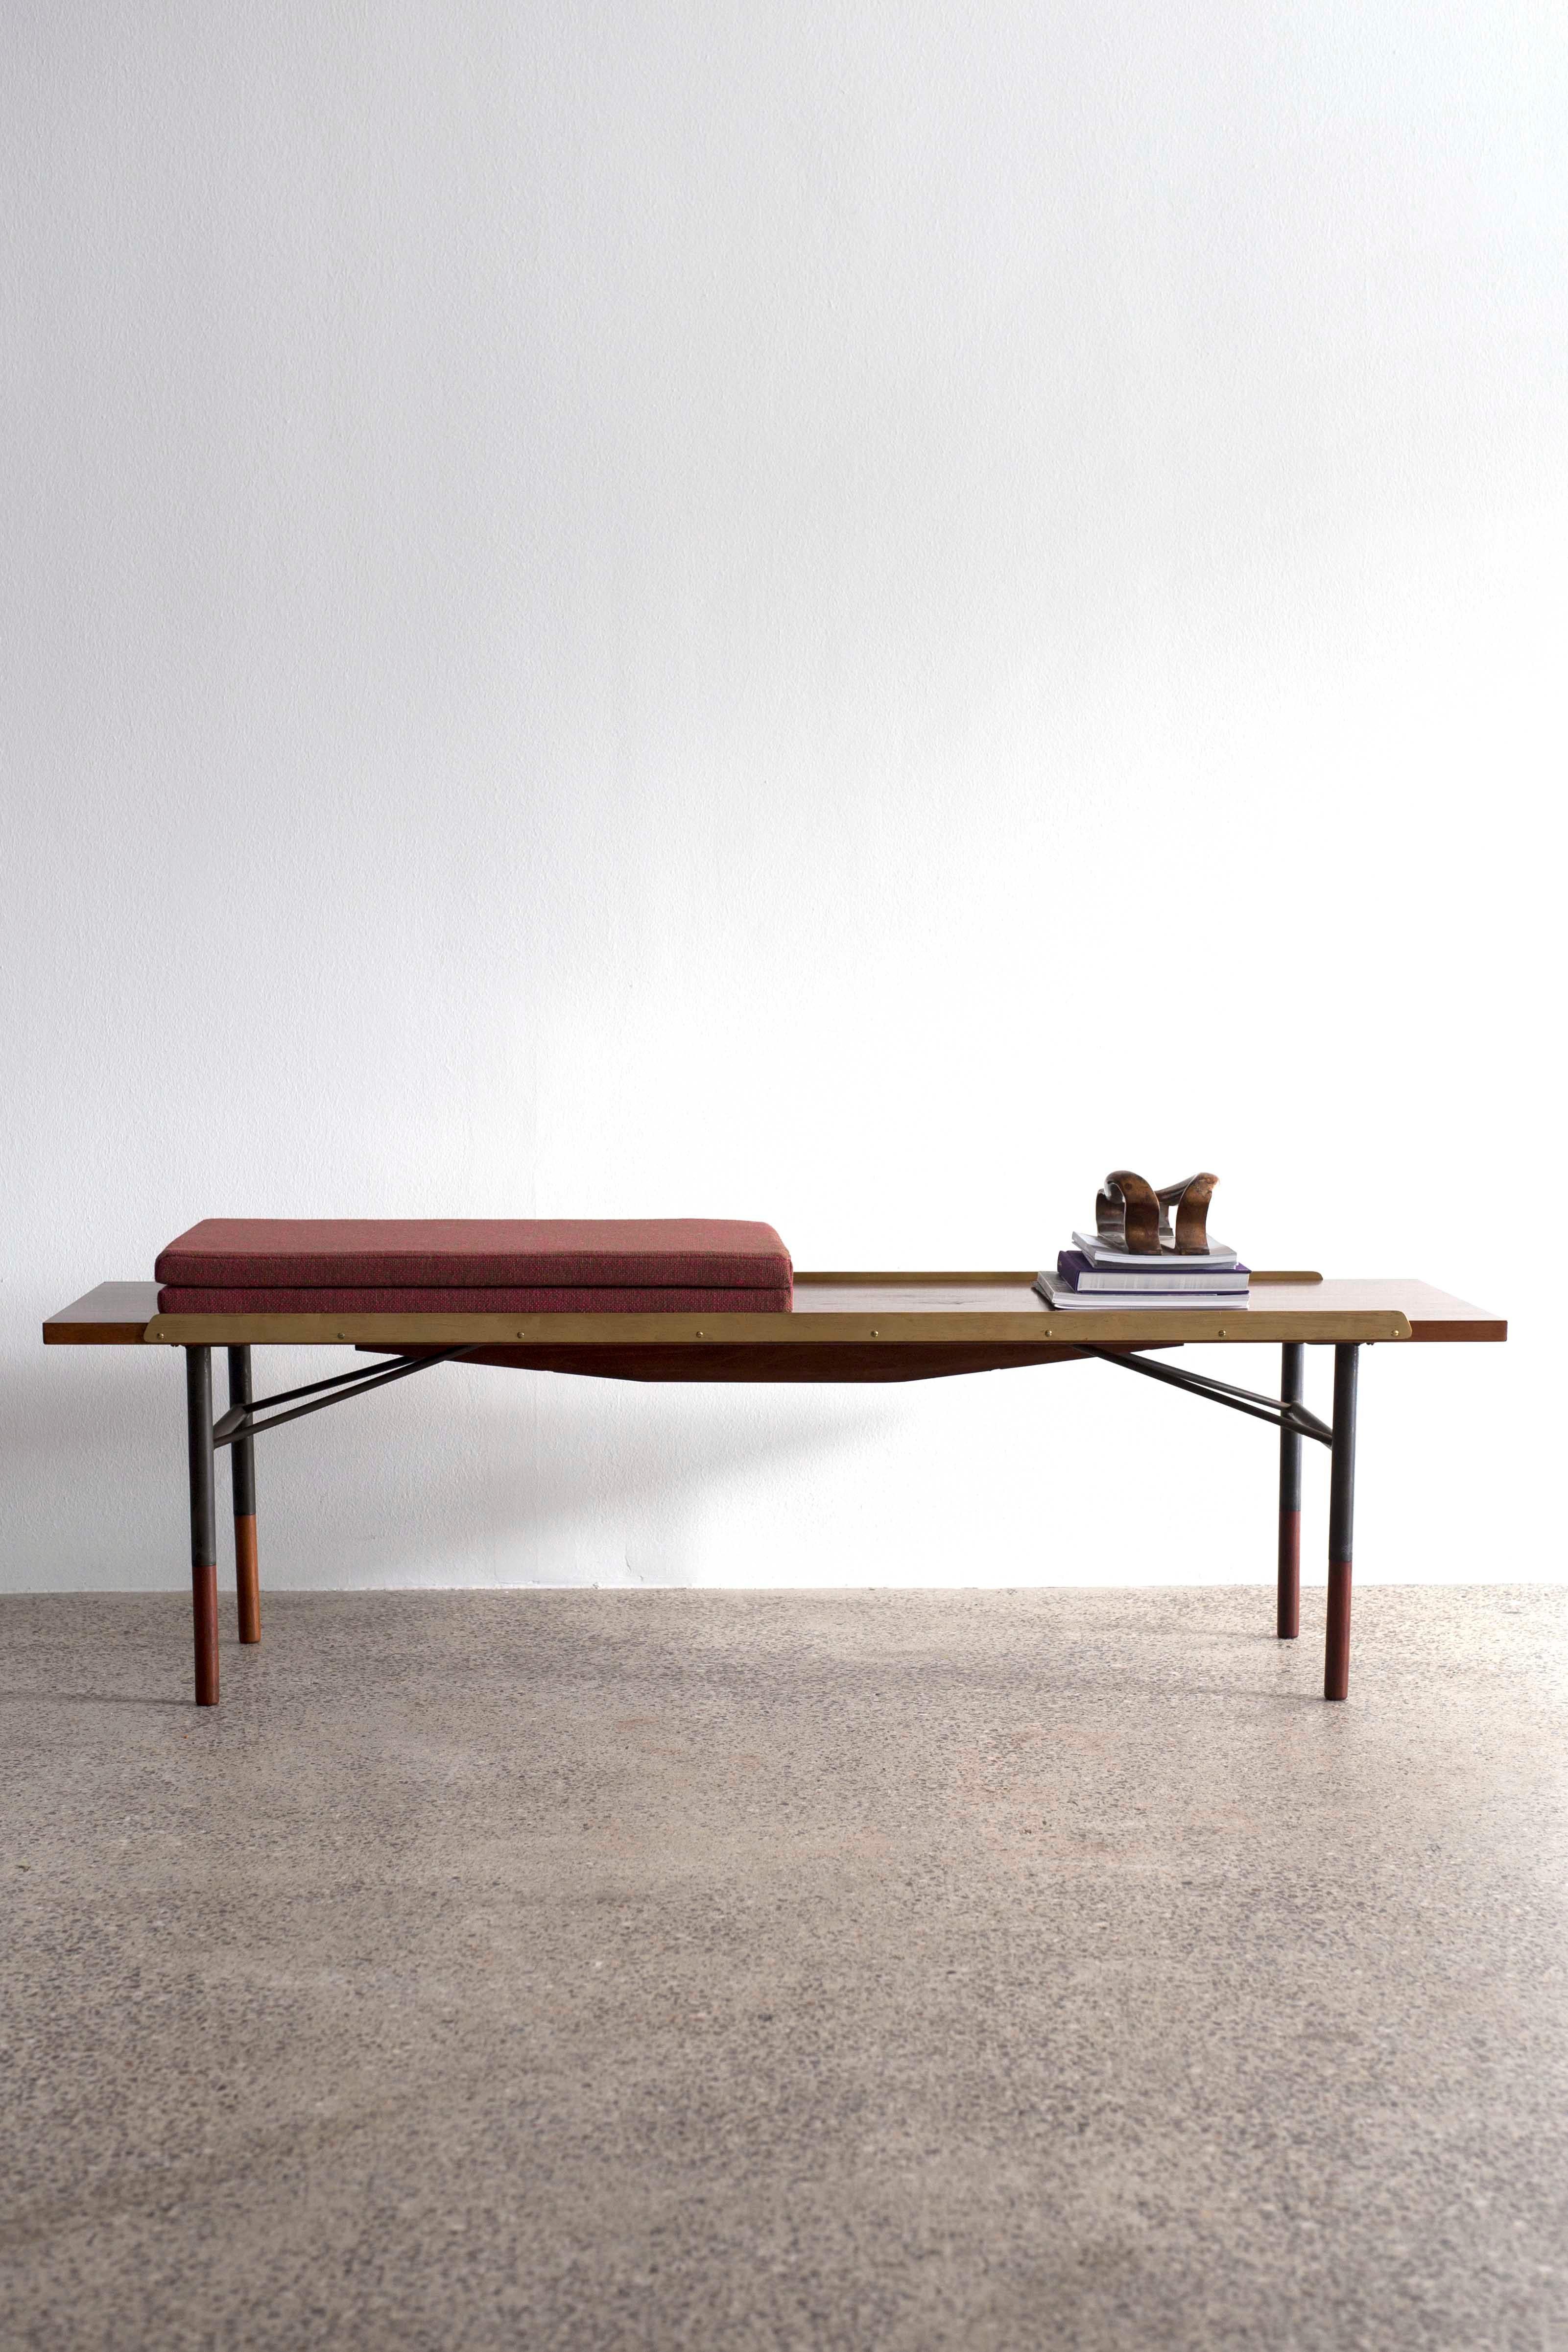 Finn Juhl table bench in teak with foldable fabric cushion. 
Frame of gunmetal and brass lists. 
Designed 1953 and made at Bovirke, Denmark.